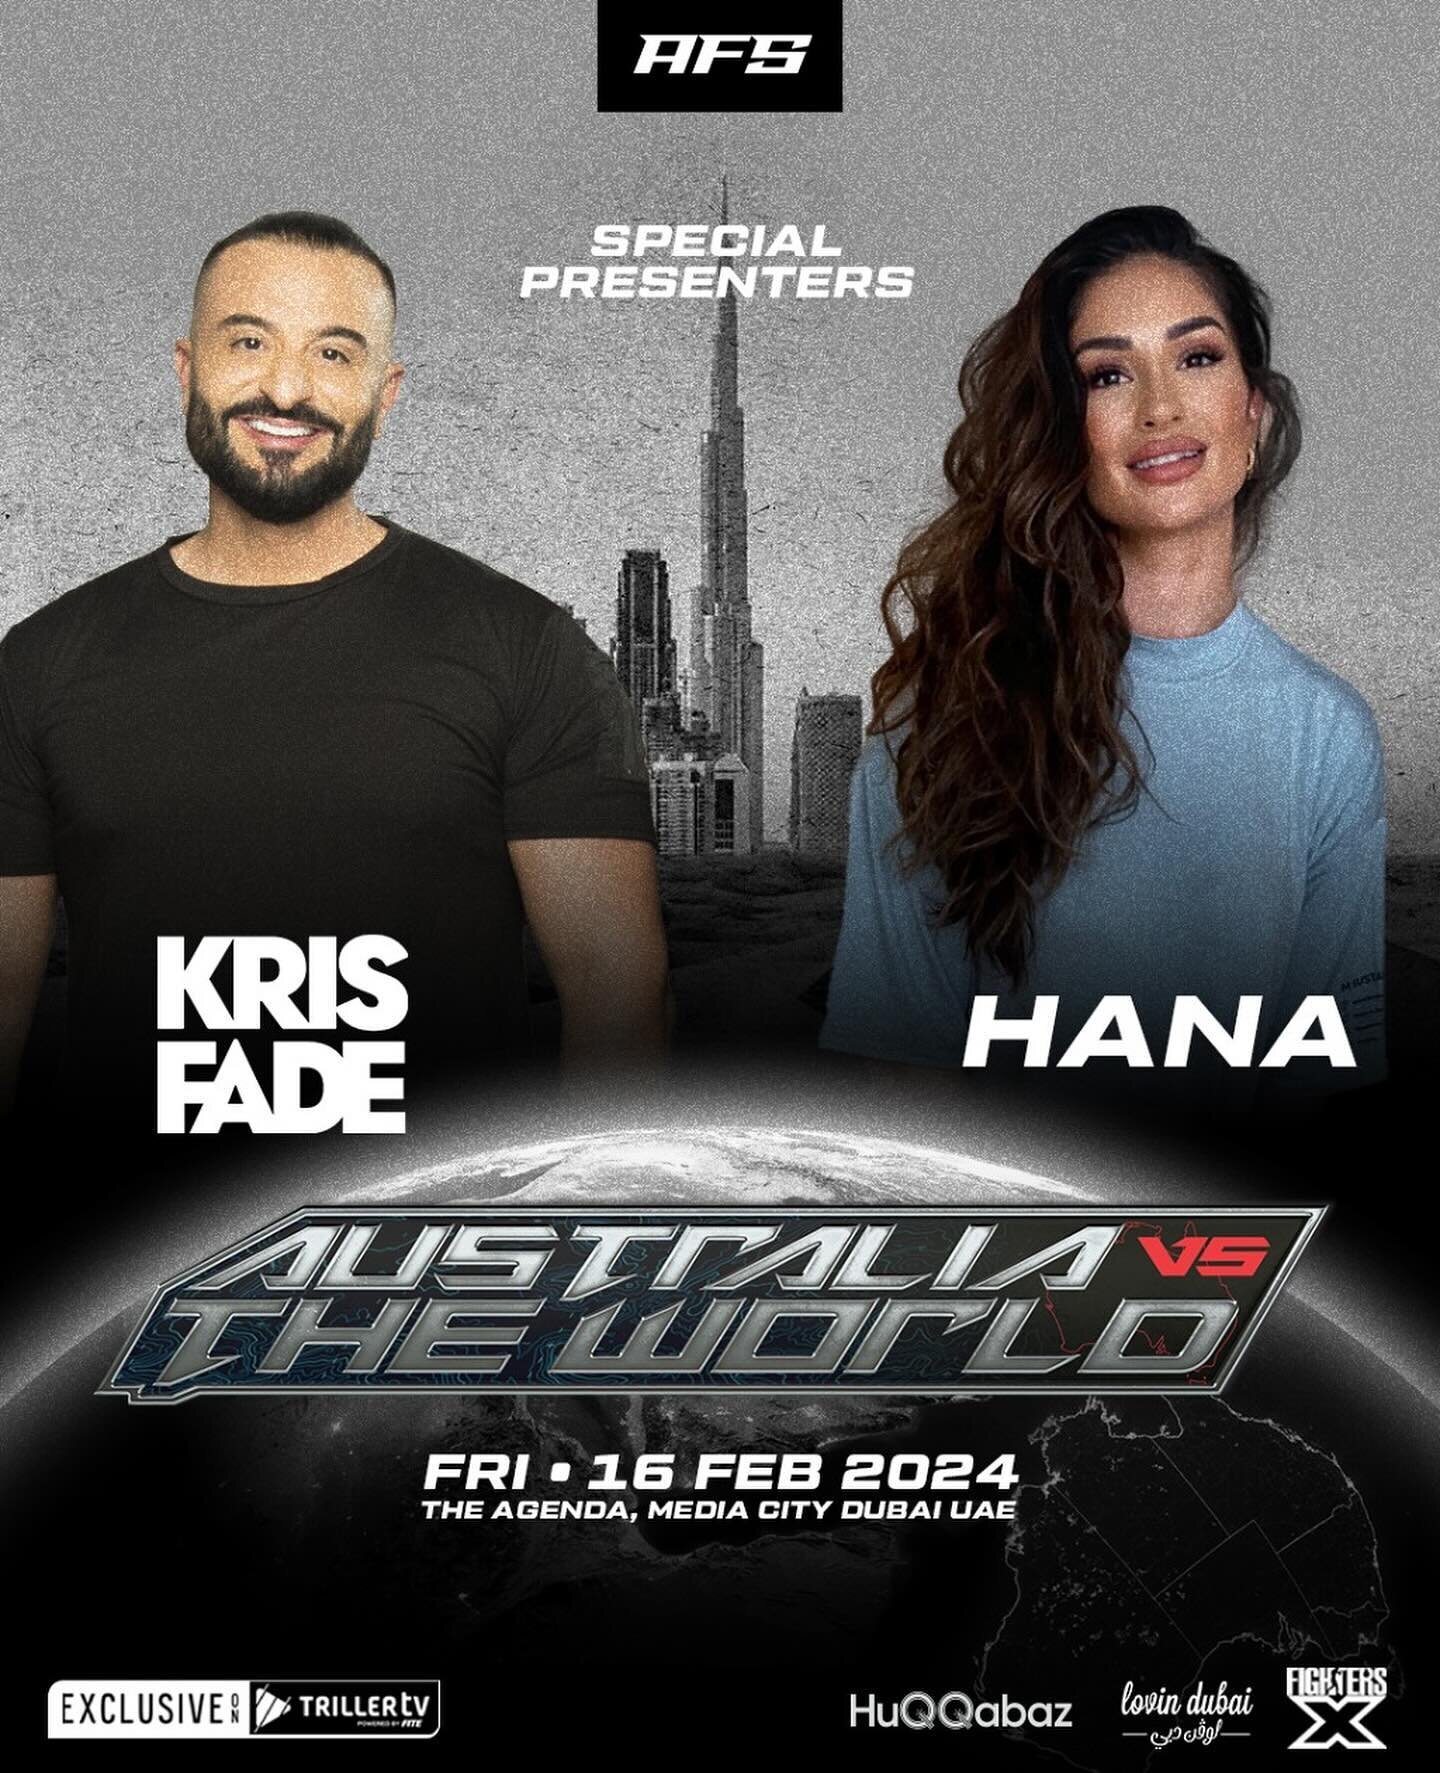 Good luck to our @itsalwayshana this evening, presenting at the @alphafightseries alongside @krisfade at @agendadubai for Australia Vs The World! 👏🏼👏🏼

🎤 Artist performances from @liltjay &amp; @mhuncho 

For any enquiries regarding Hana, please